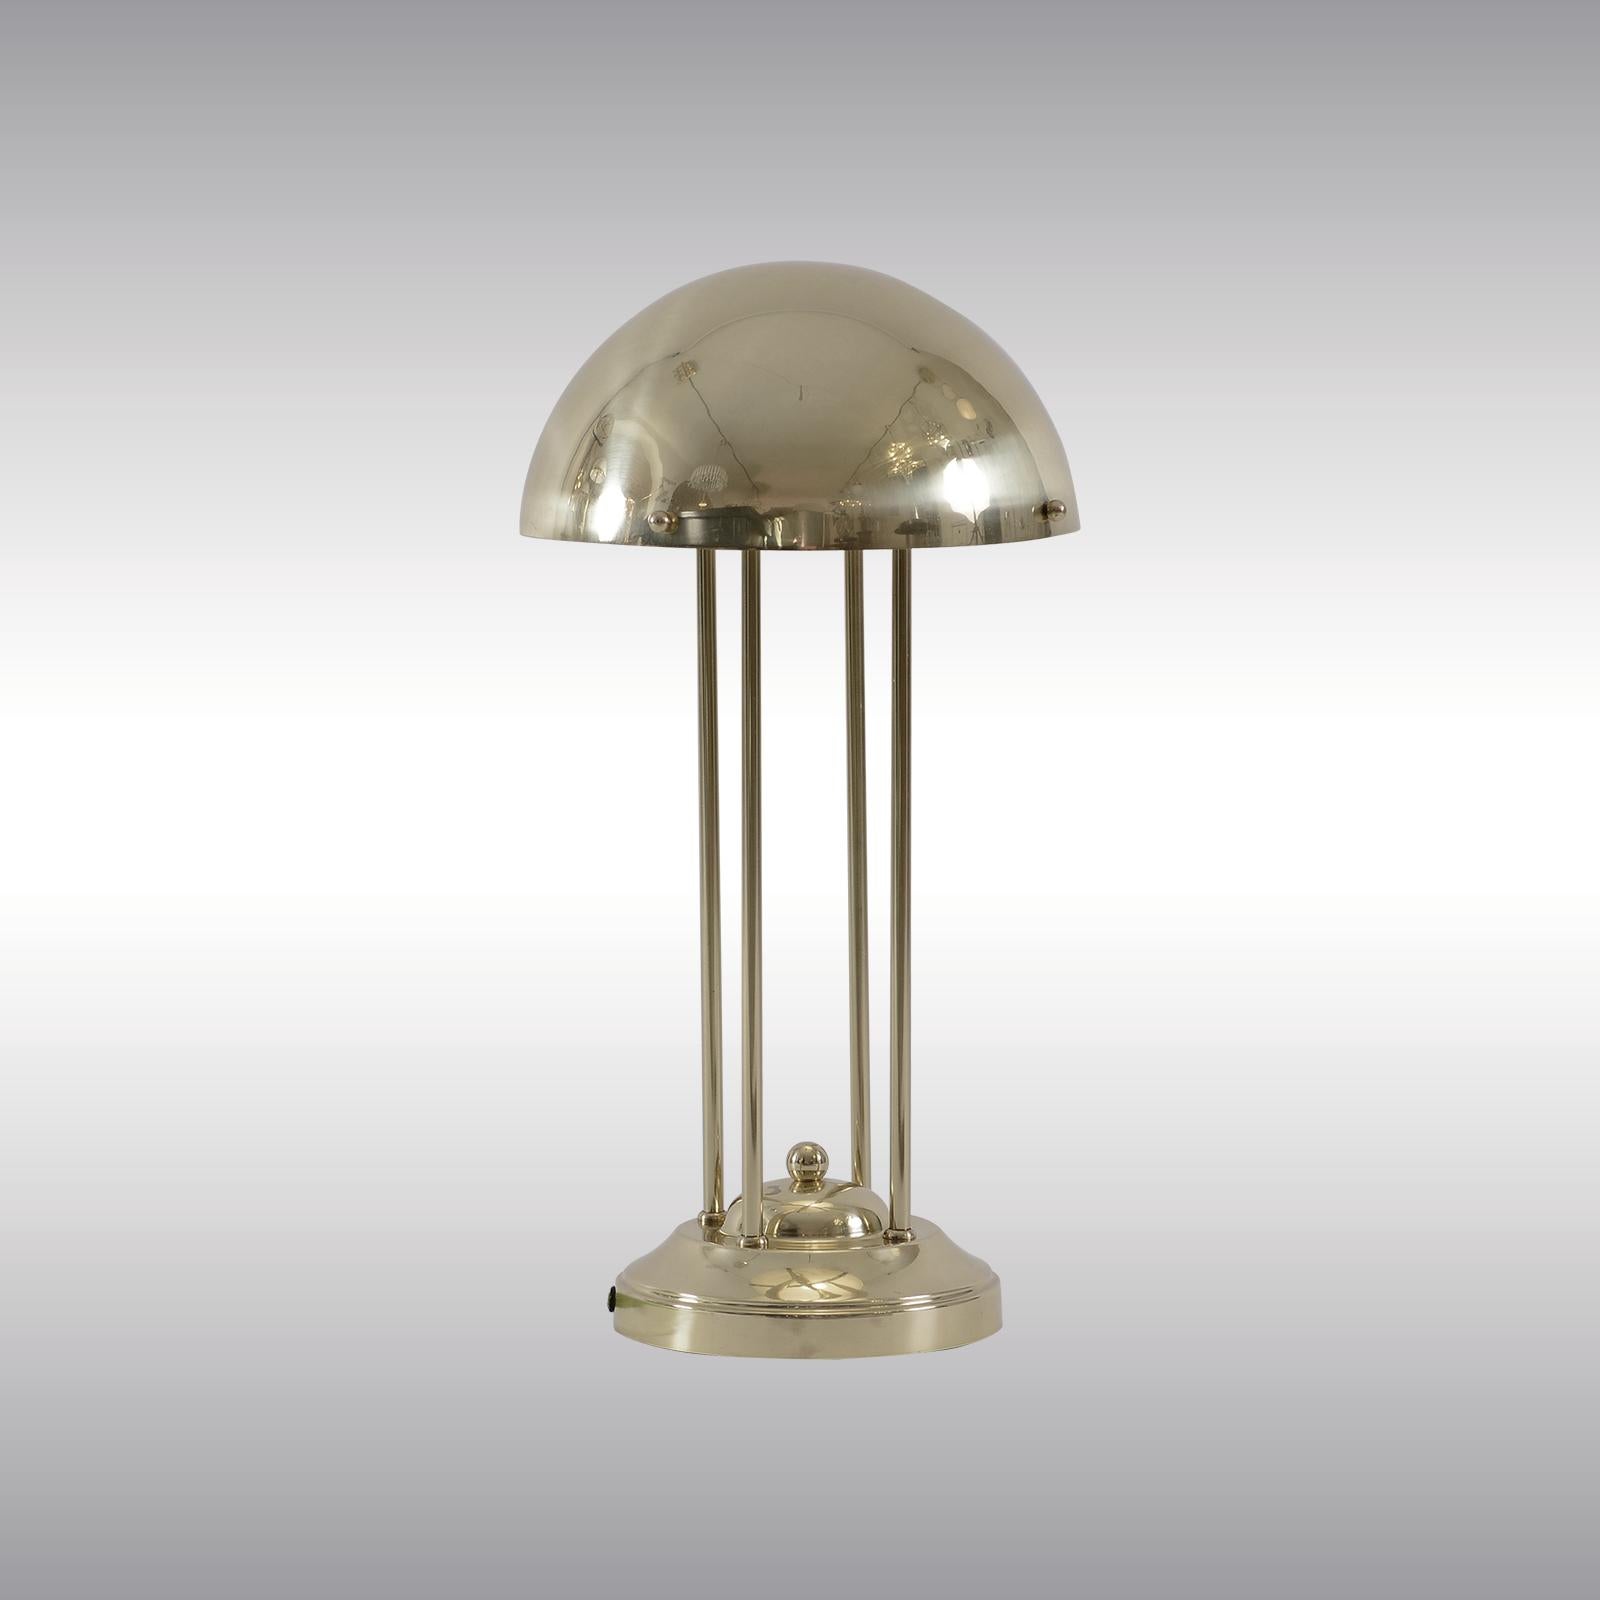 Avantgardistic Josef Hoffmann Secessionist Jugendstil Table Lamp Re-Edition  In New Condition For Sale In Vienna, AT